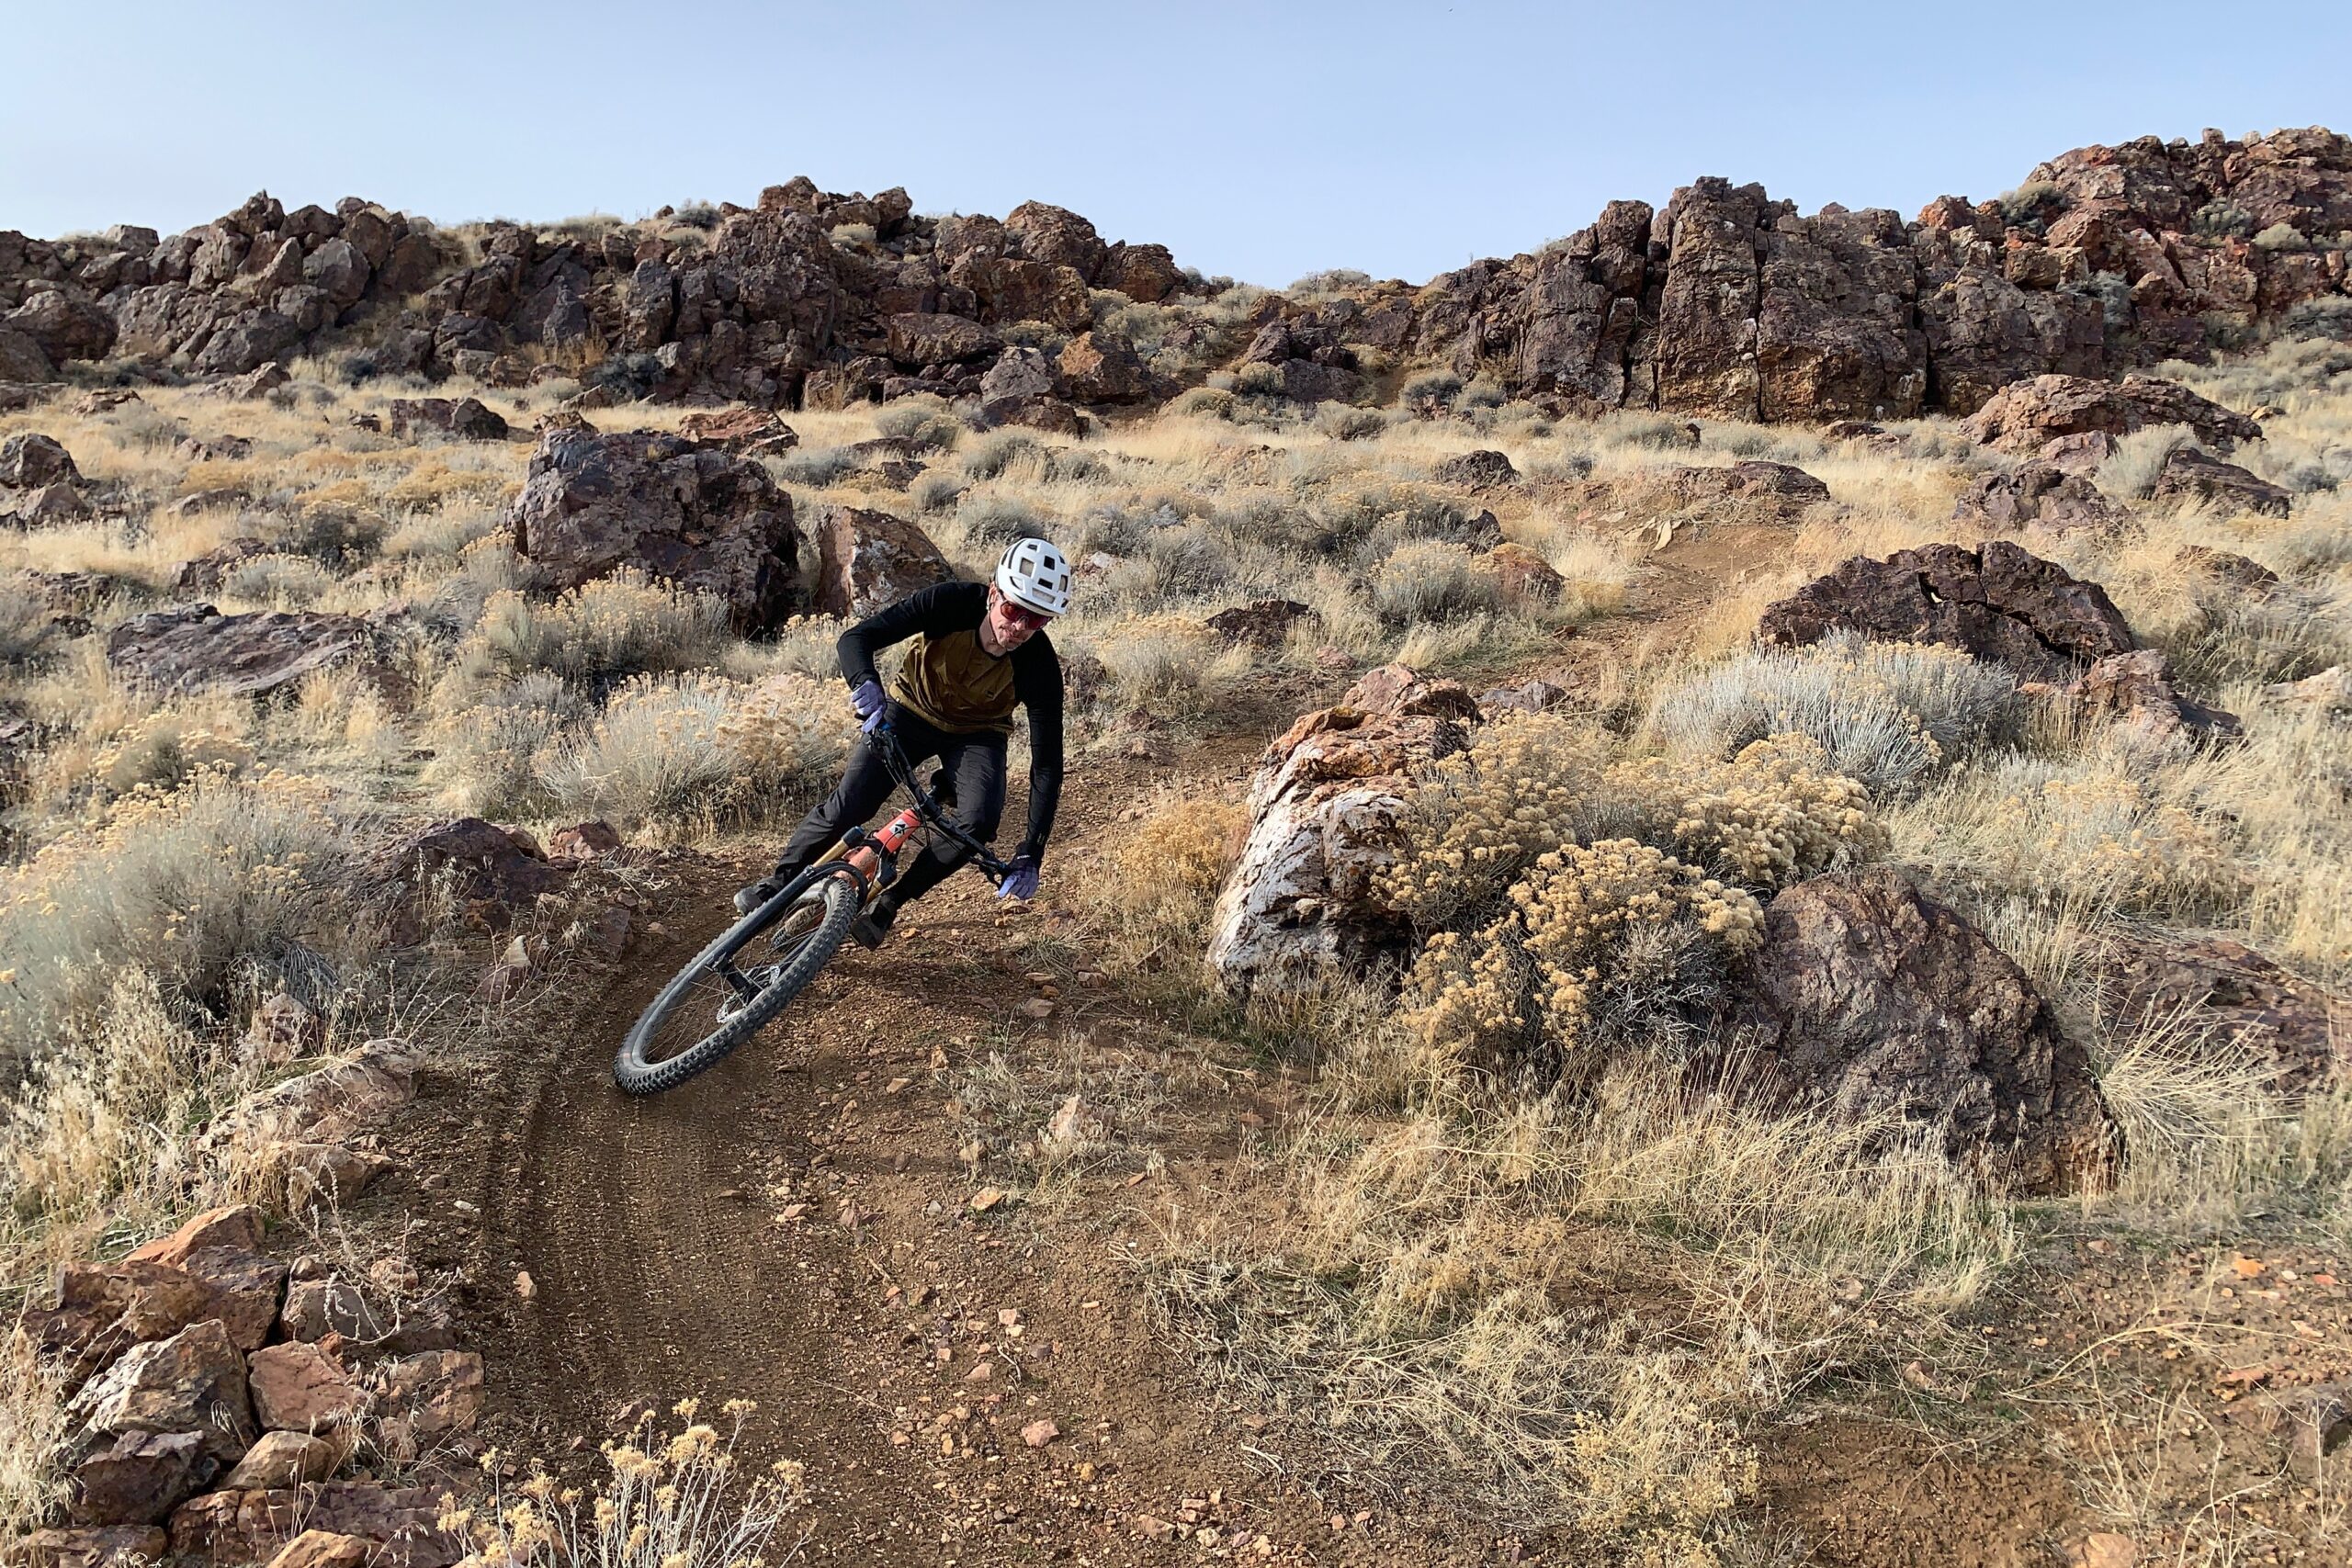 Riding a mountain bike on dry trails in conditions well suited to using a dry chain lube